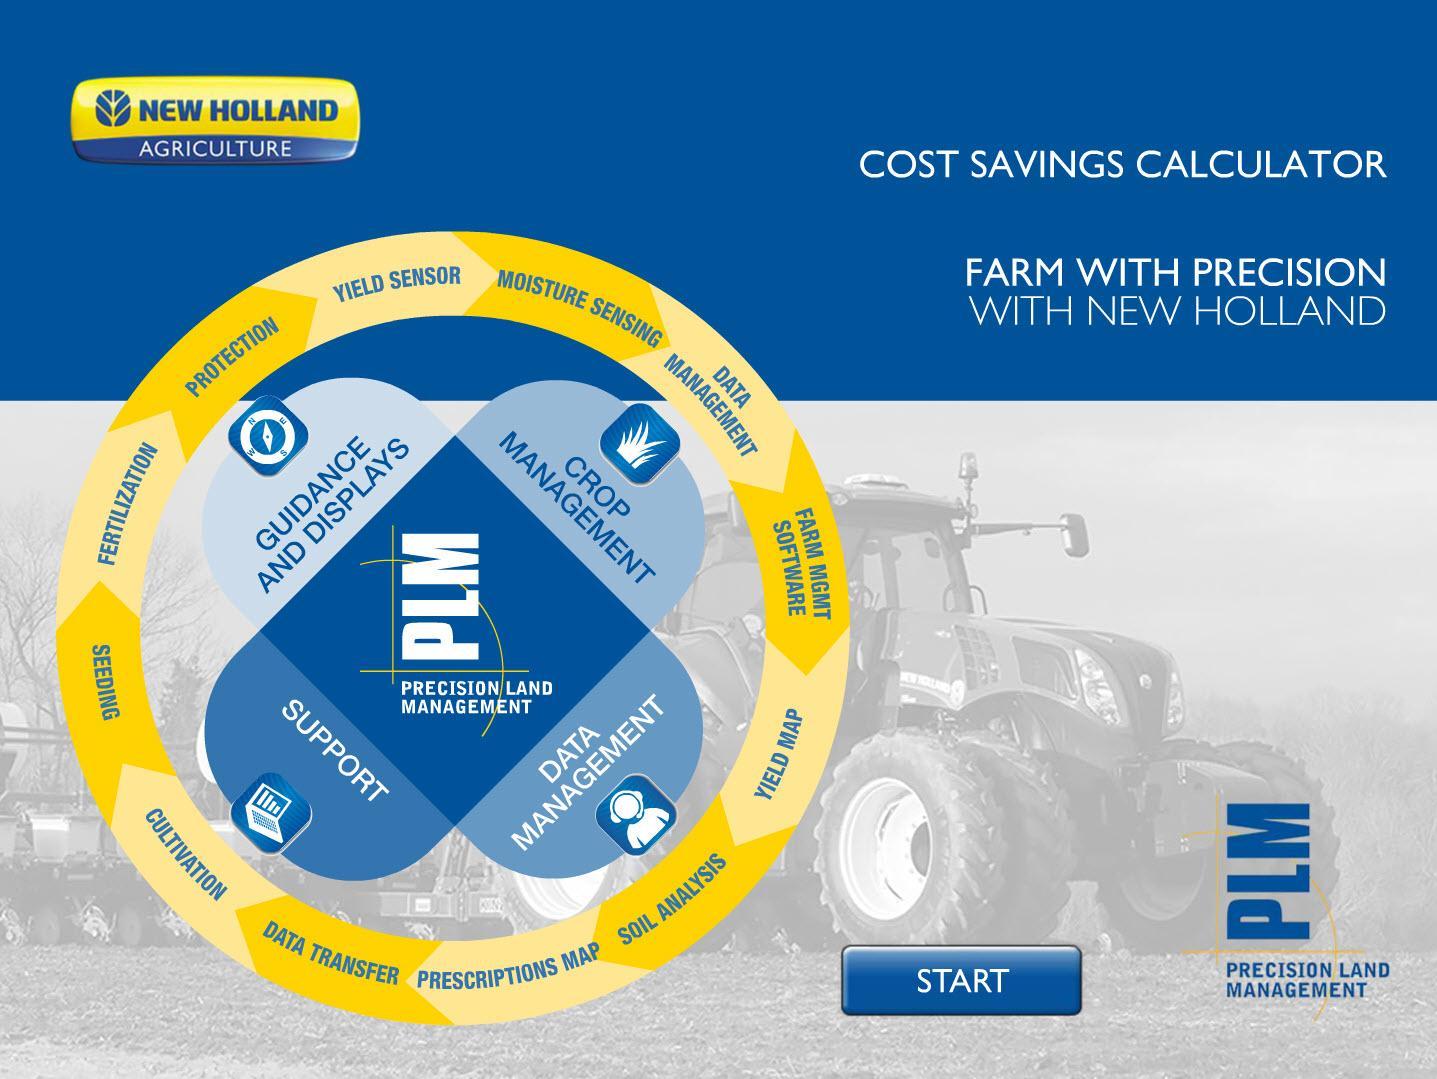 PLM New Holland. New Holland Agriculture - пластина - 47581648. New Holland Agriculture - датчик - 51622450. New Holland Land. Каталог new holland